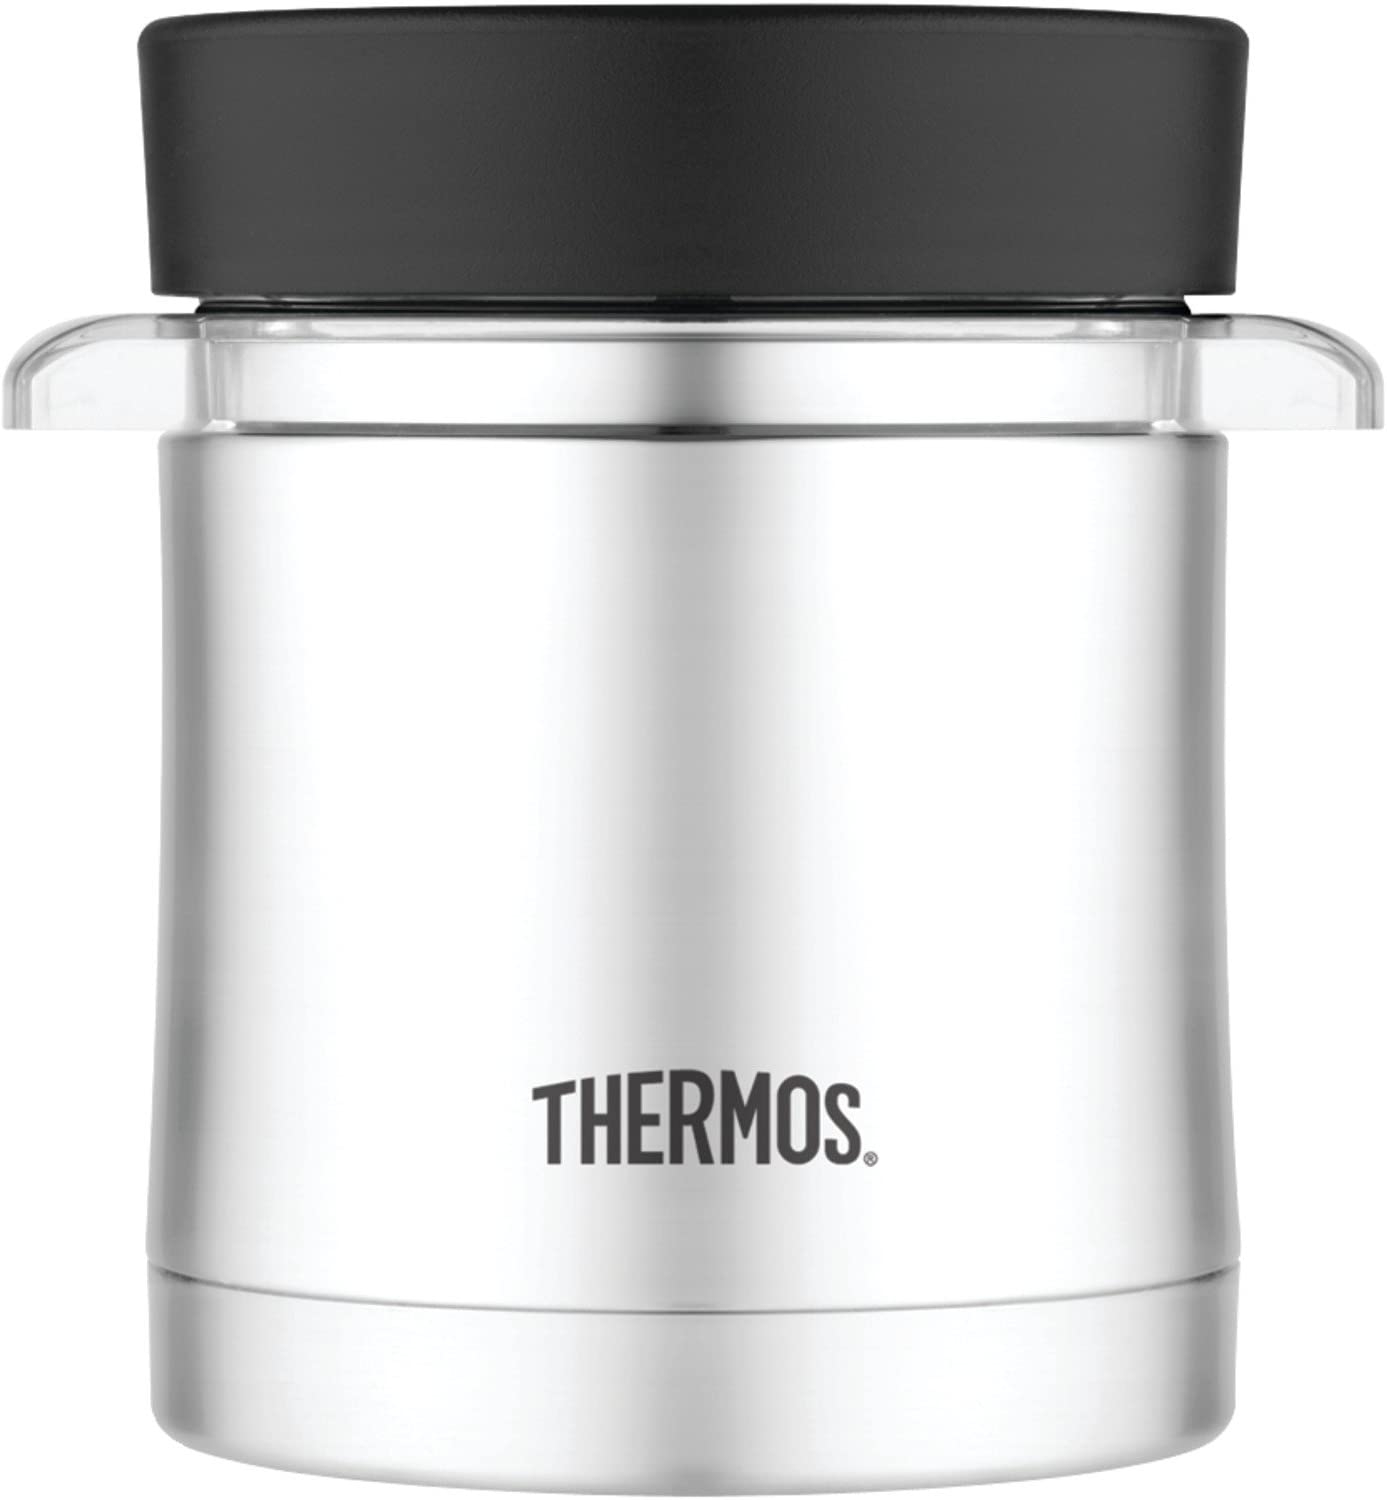 Thermos Food Jar with Microwavable Container, 12-Ounce, Stainless Steel Import To Shop ×Product customization General